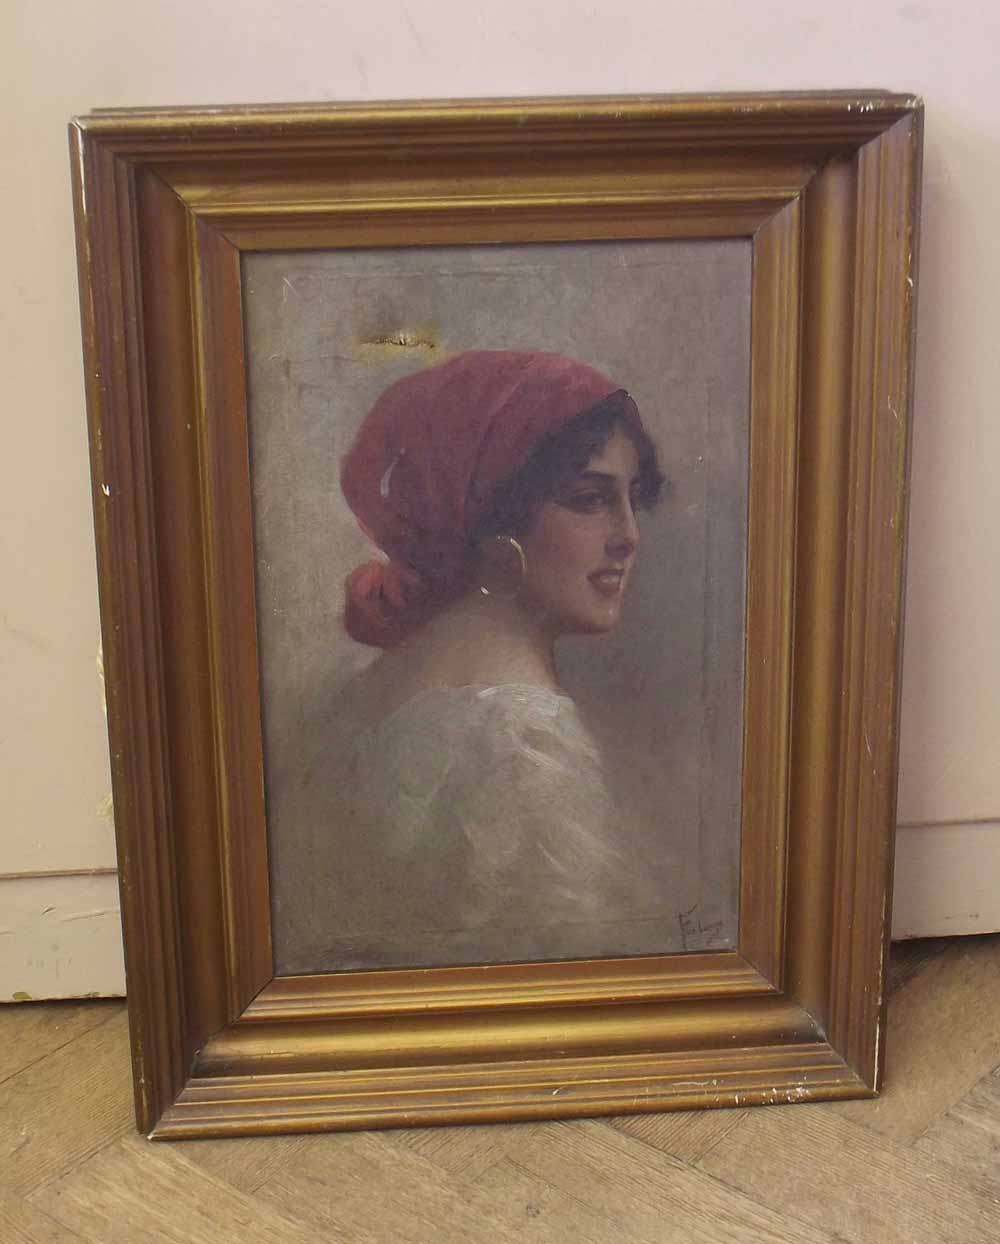 Forlenze, 19th century Italian female portrait, oil on canvas. Condition report: see terms and